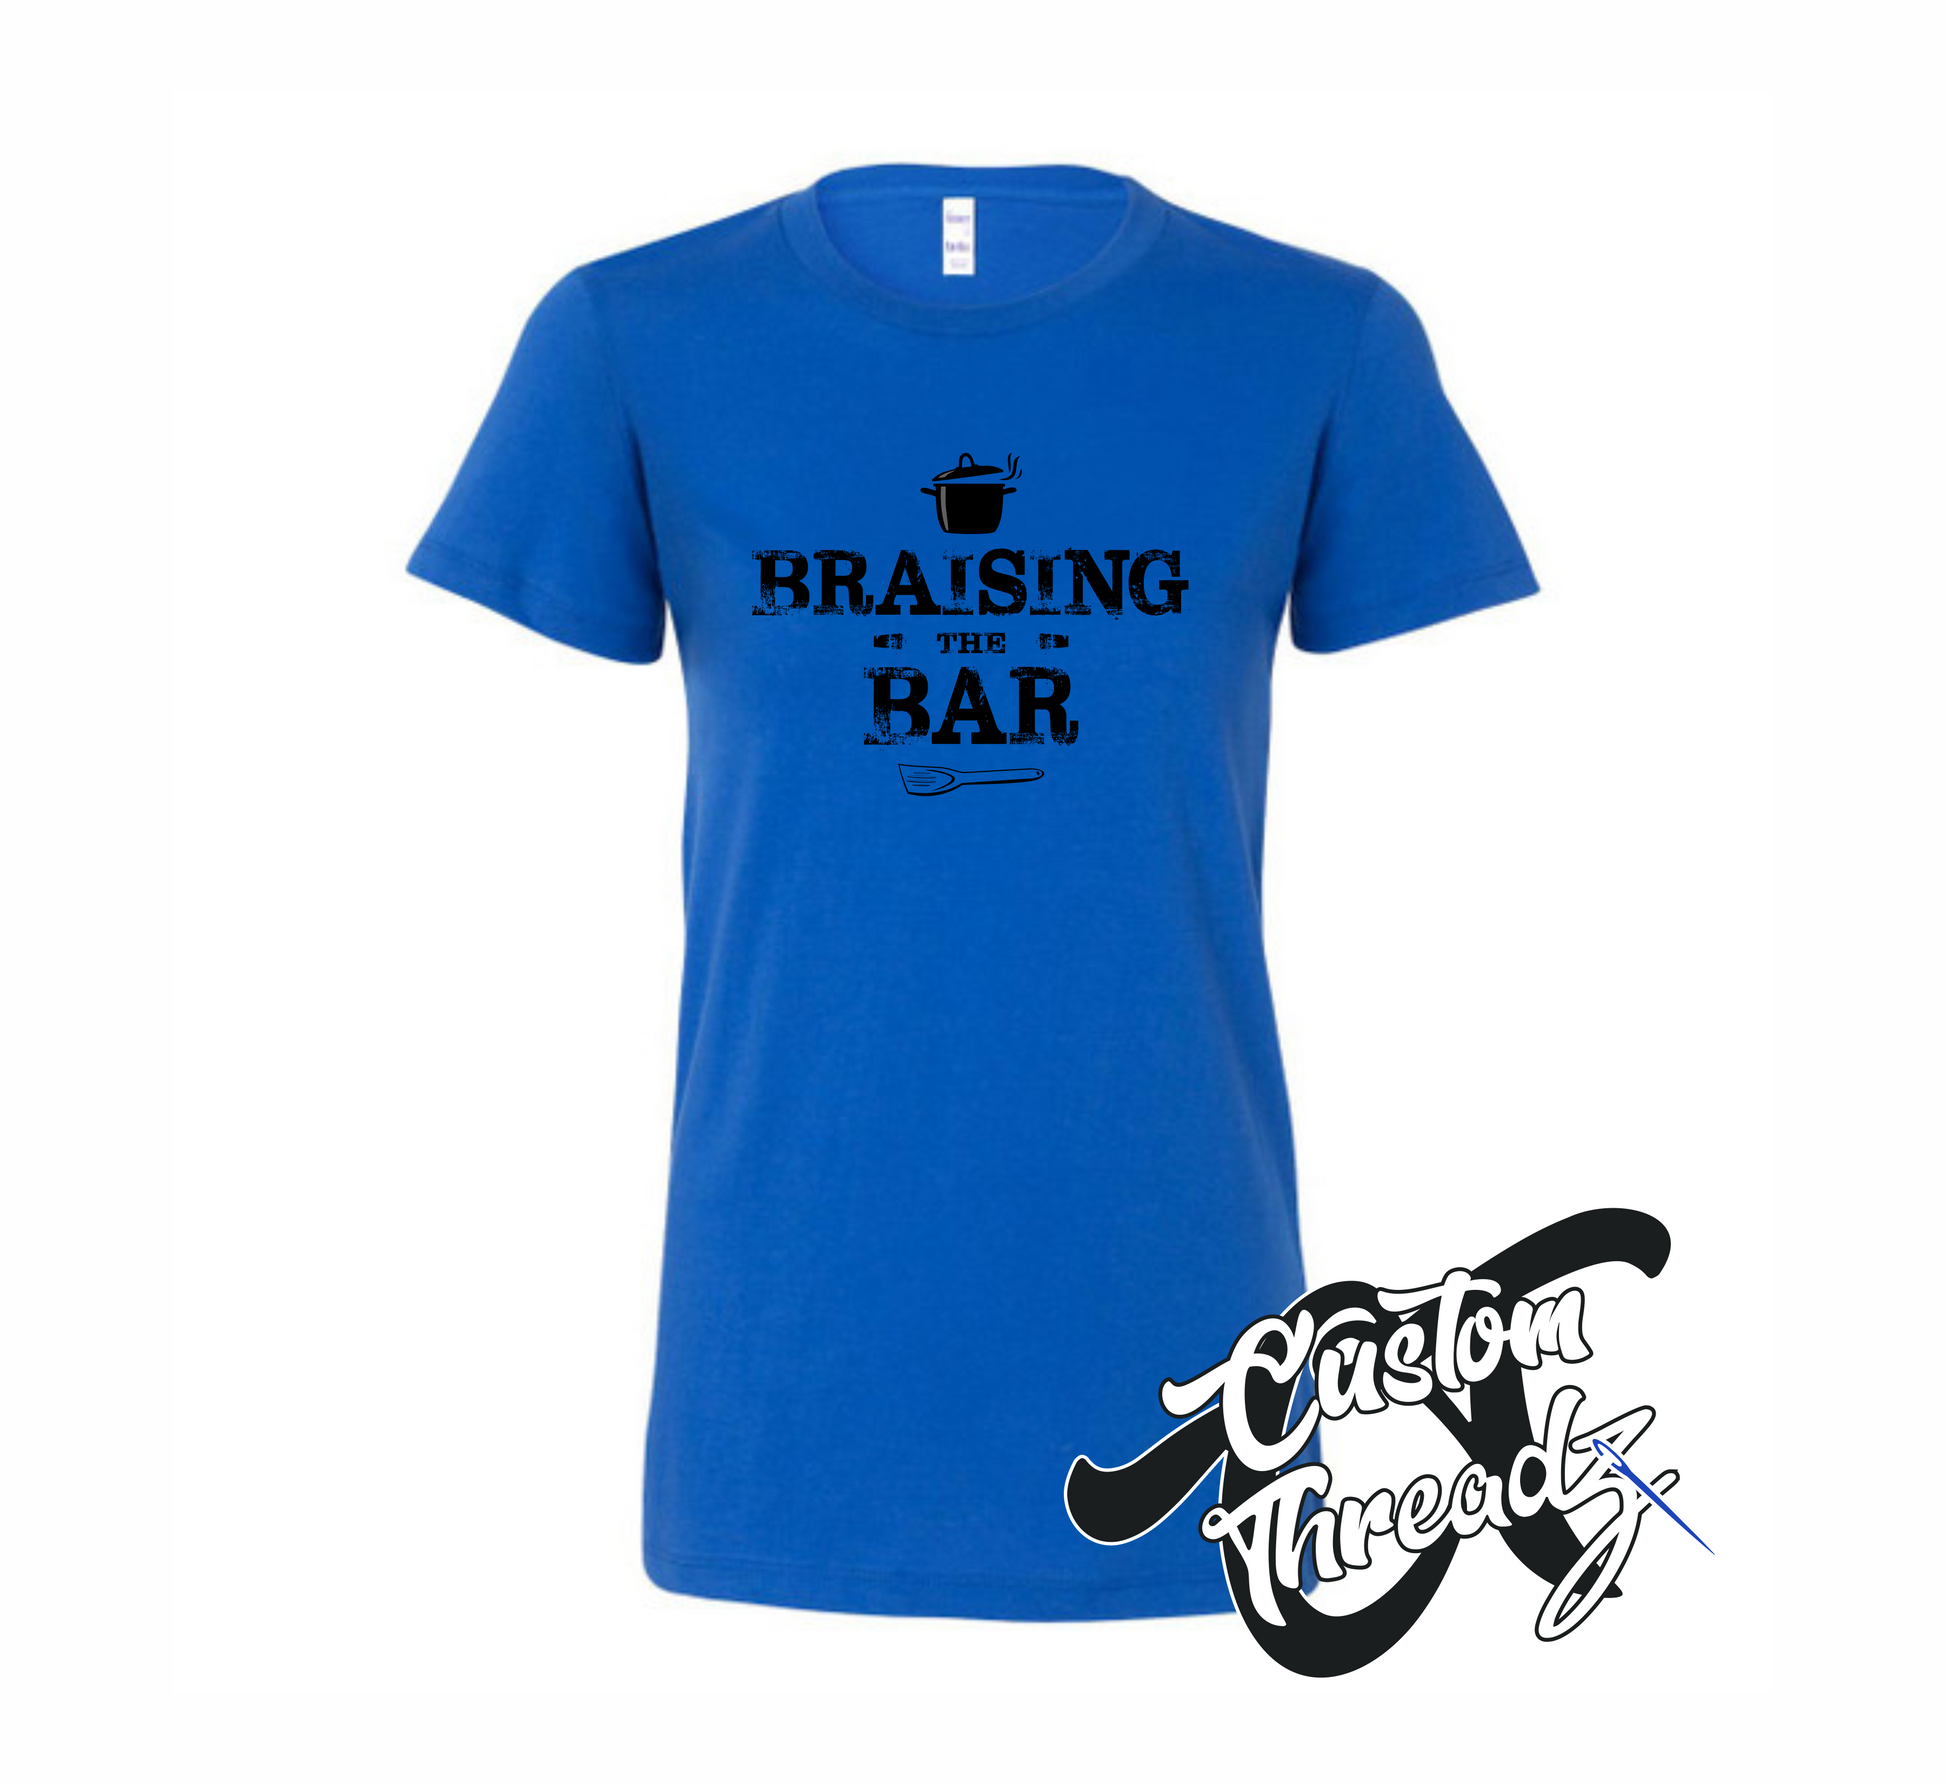 royal blue womens tee with braising the bar summertime DTG printed design